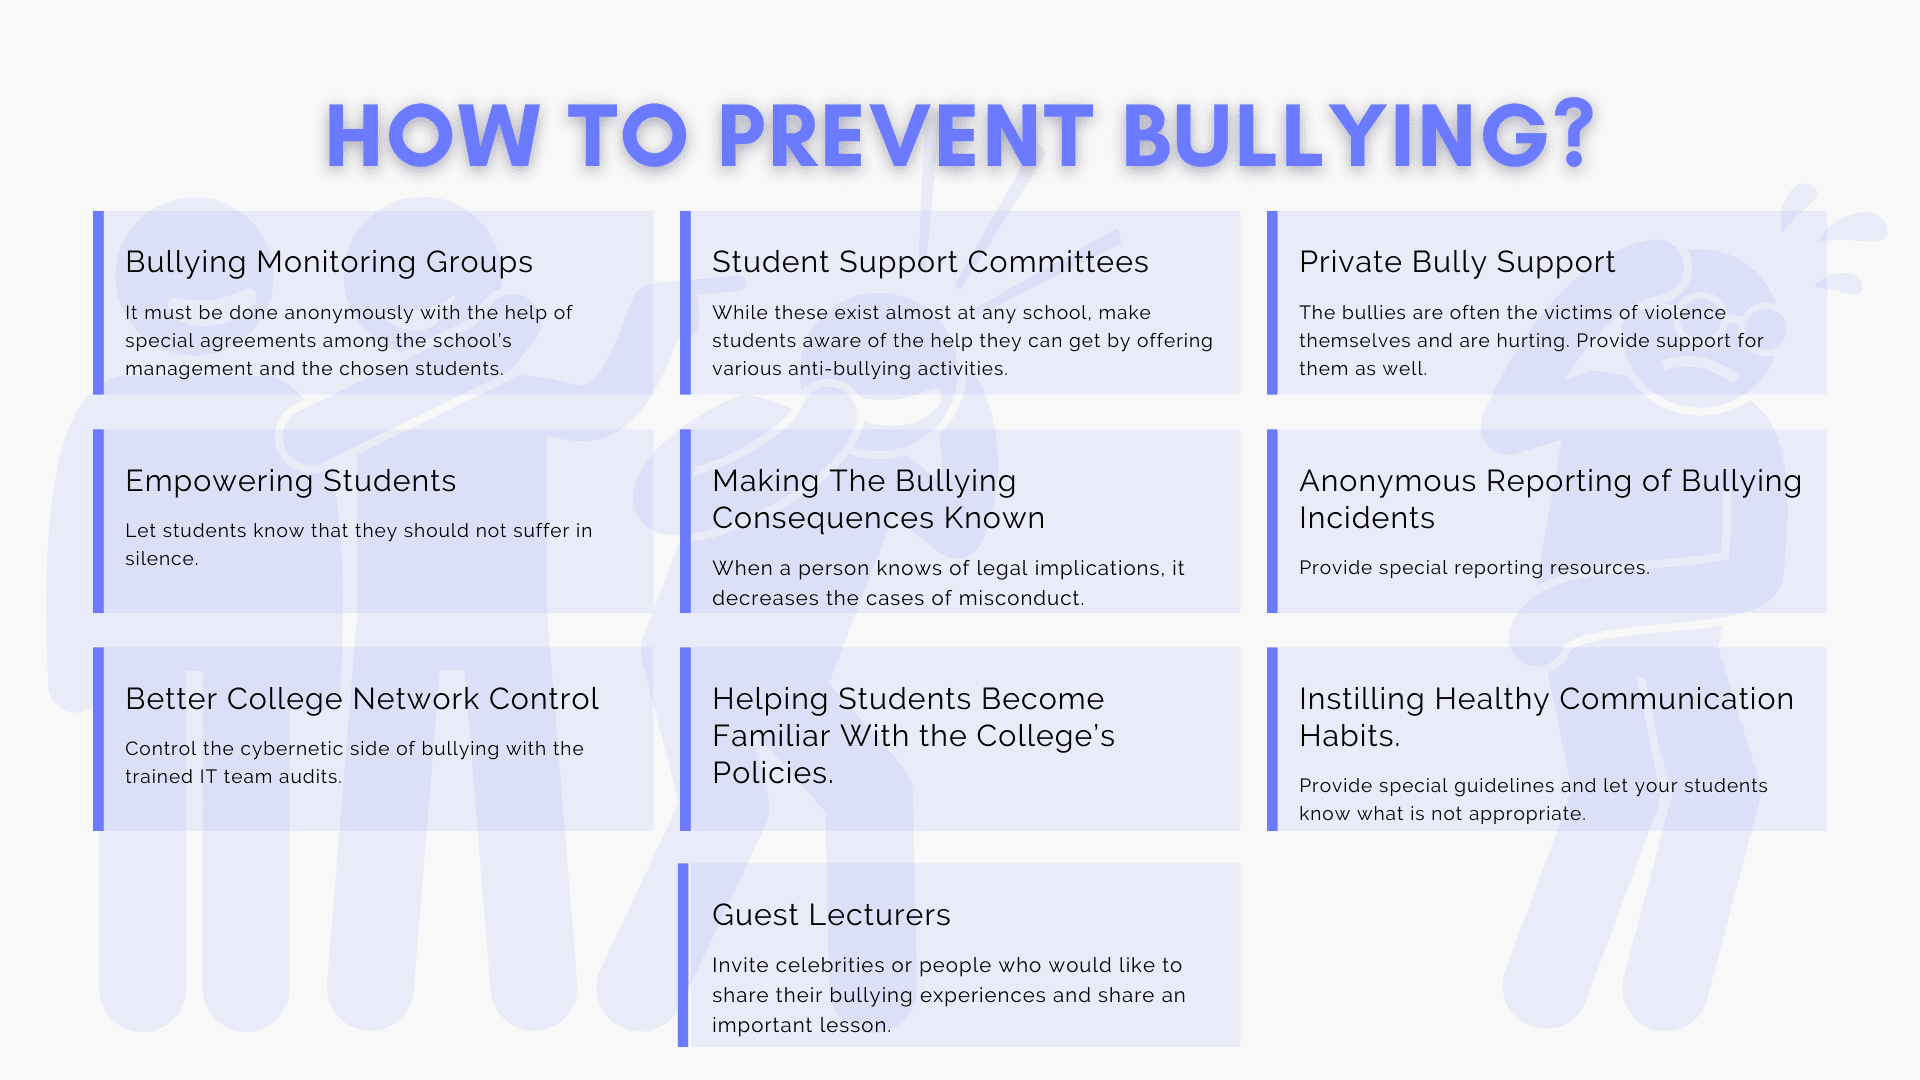 How to Prevent Bullying